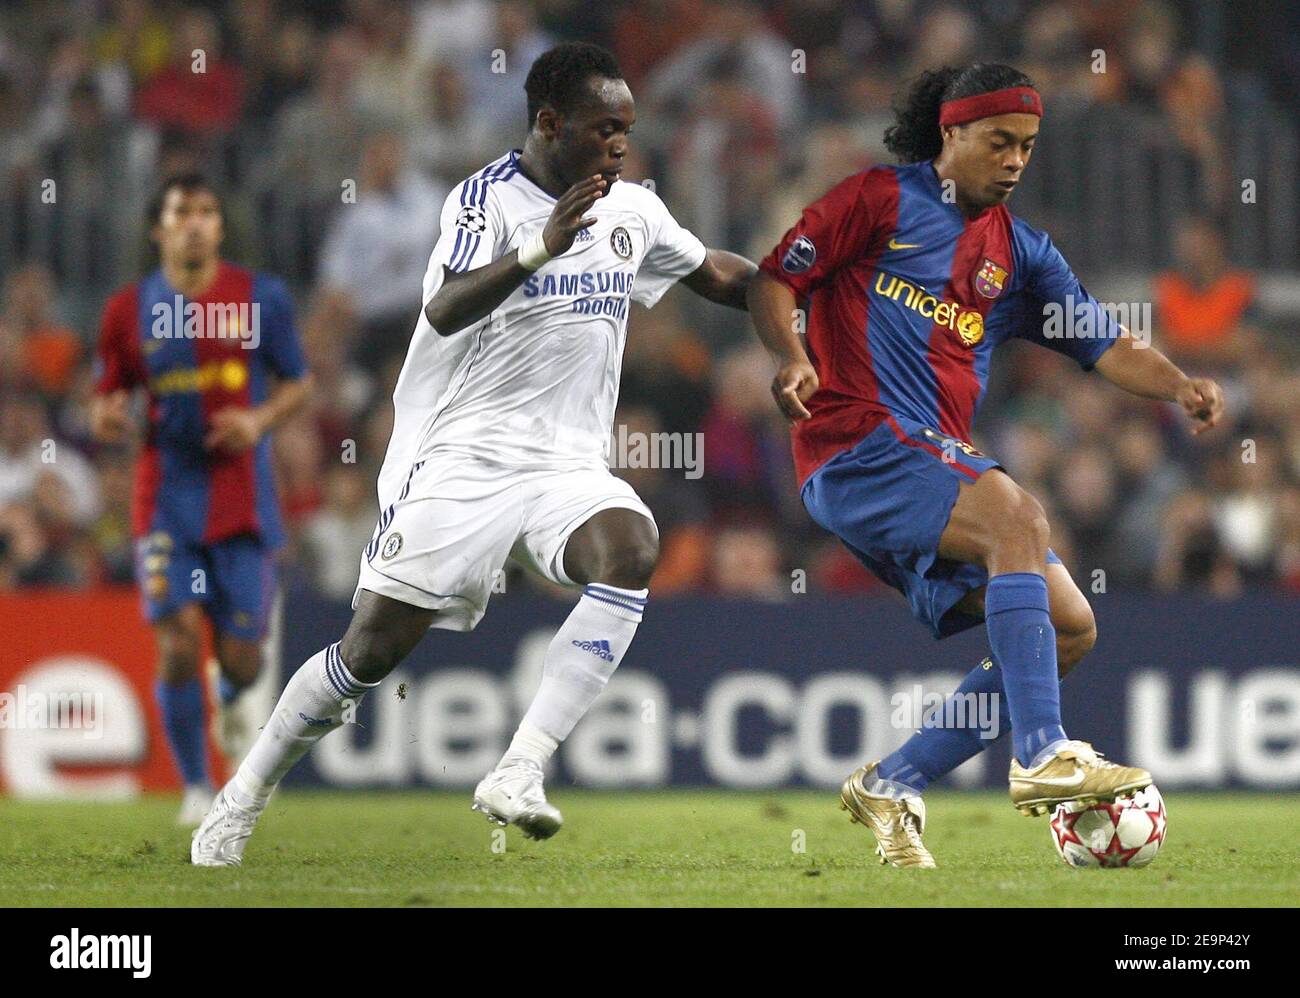 Chelsea's Michael Essien and Barcelona's Ronaldinho battle for the ball during the UEFA Champions League, Group A, Barcelona vs Chelsea at the Camp Nou stadium in Barcelona, Spain on October 31, 2006. The match ended in a 2-2 draw. Photo by Christian Liewig/ABACAPRESS.COM Stock Photo